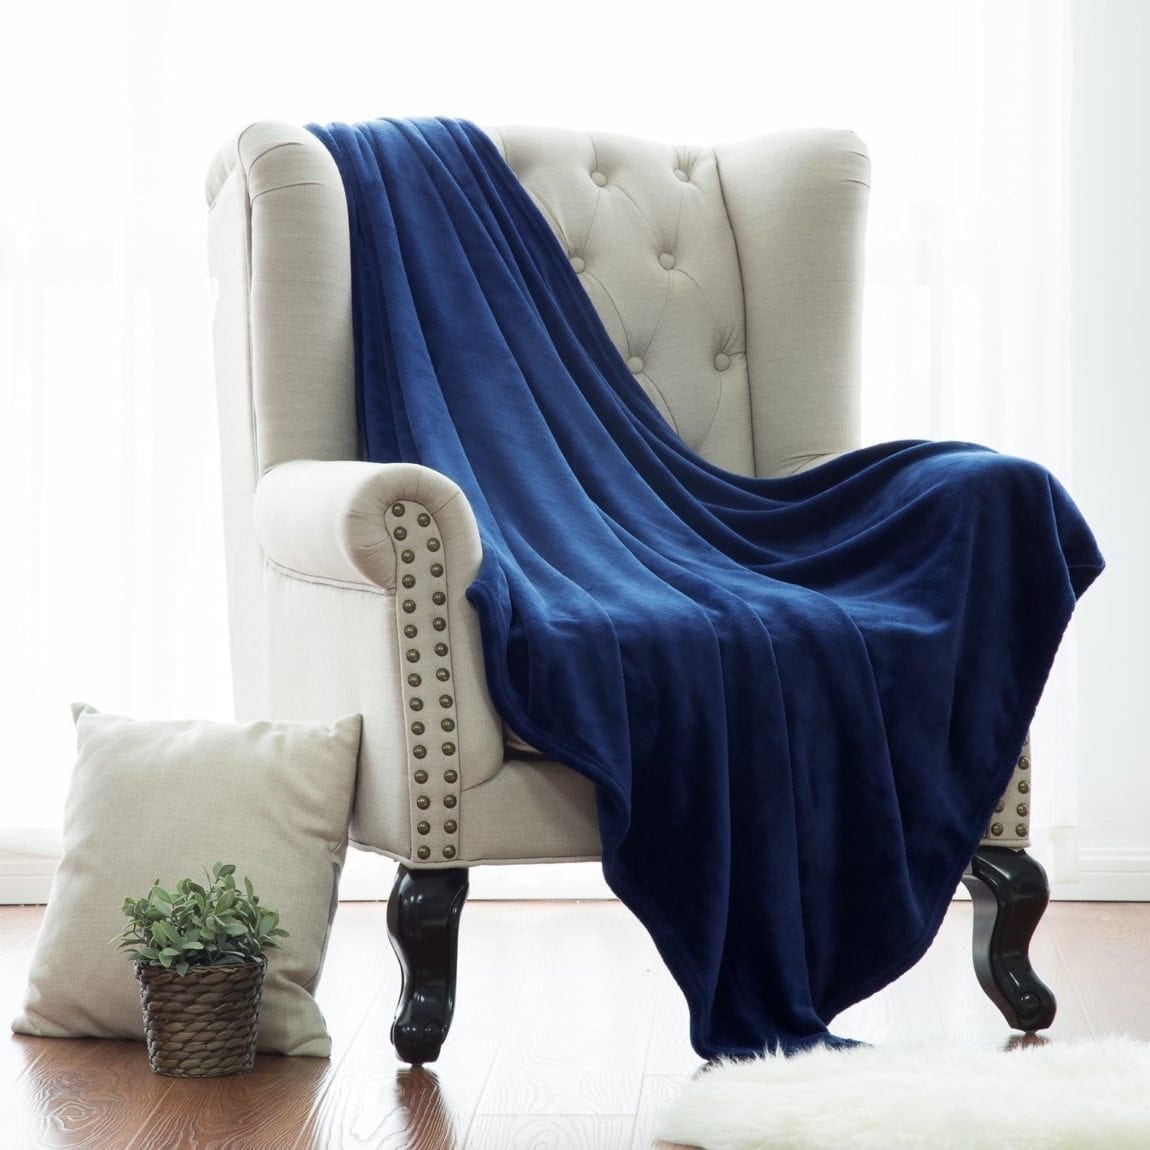 25 Of The Best Throw Blankets For Your Home